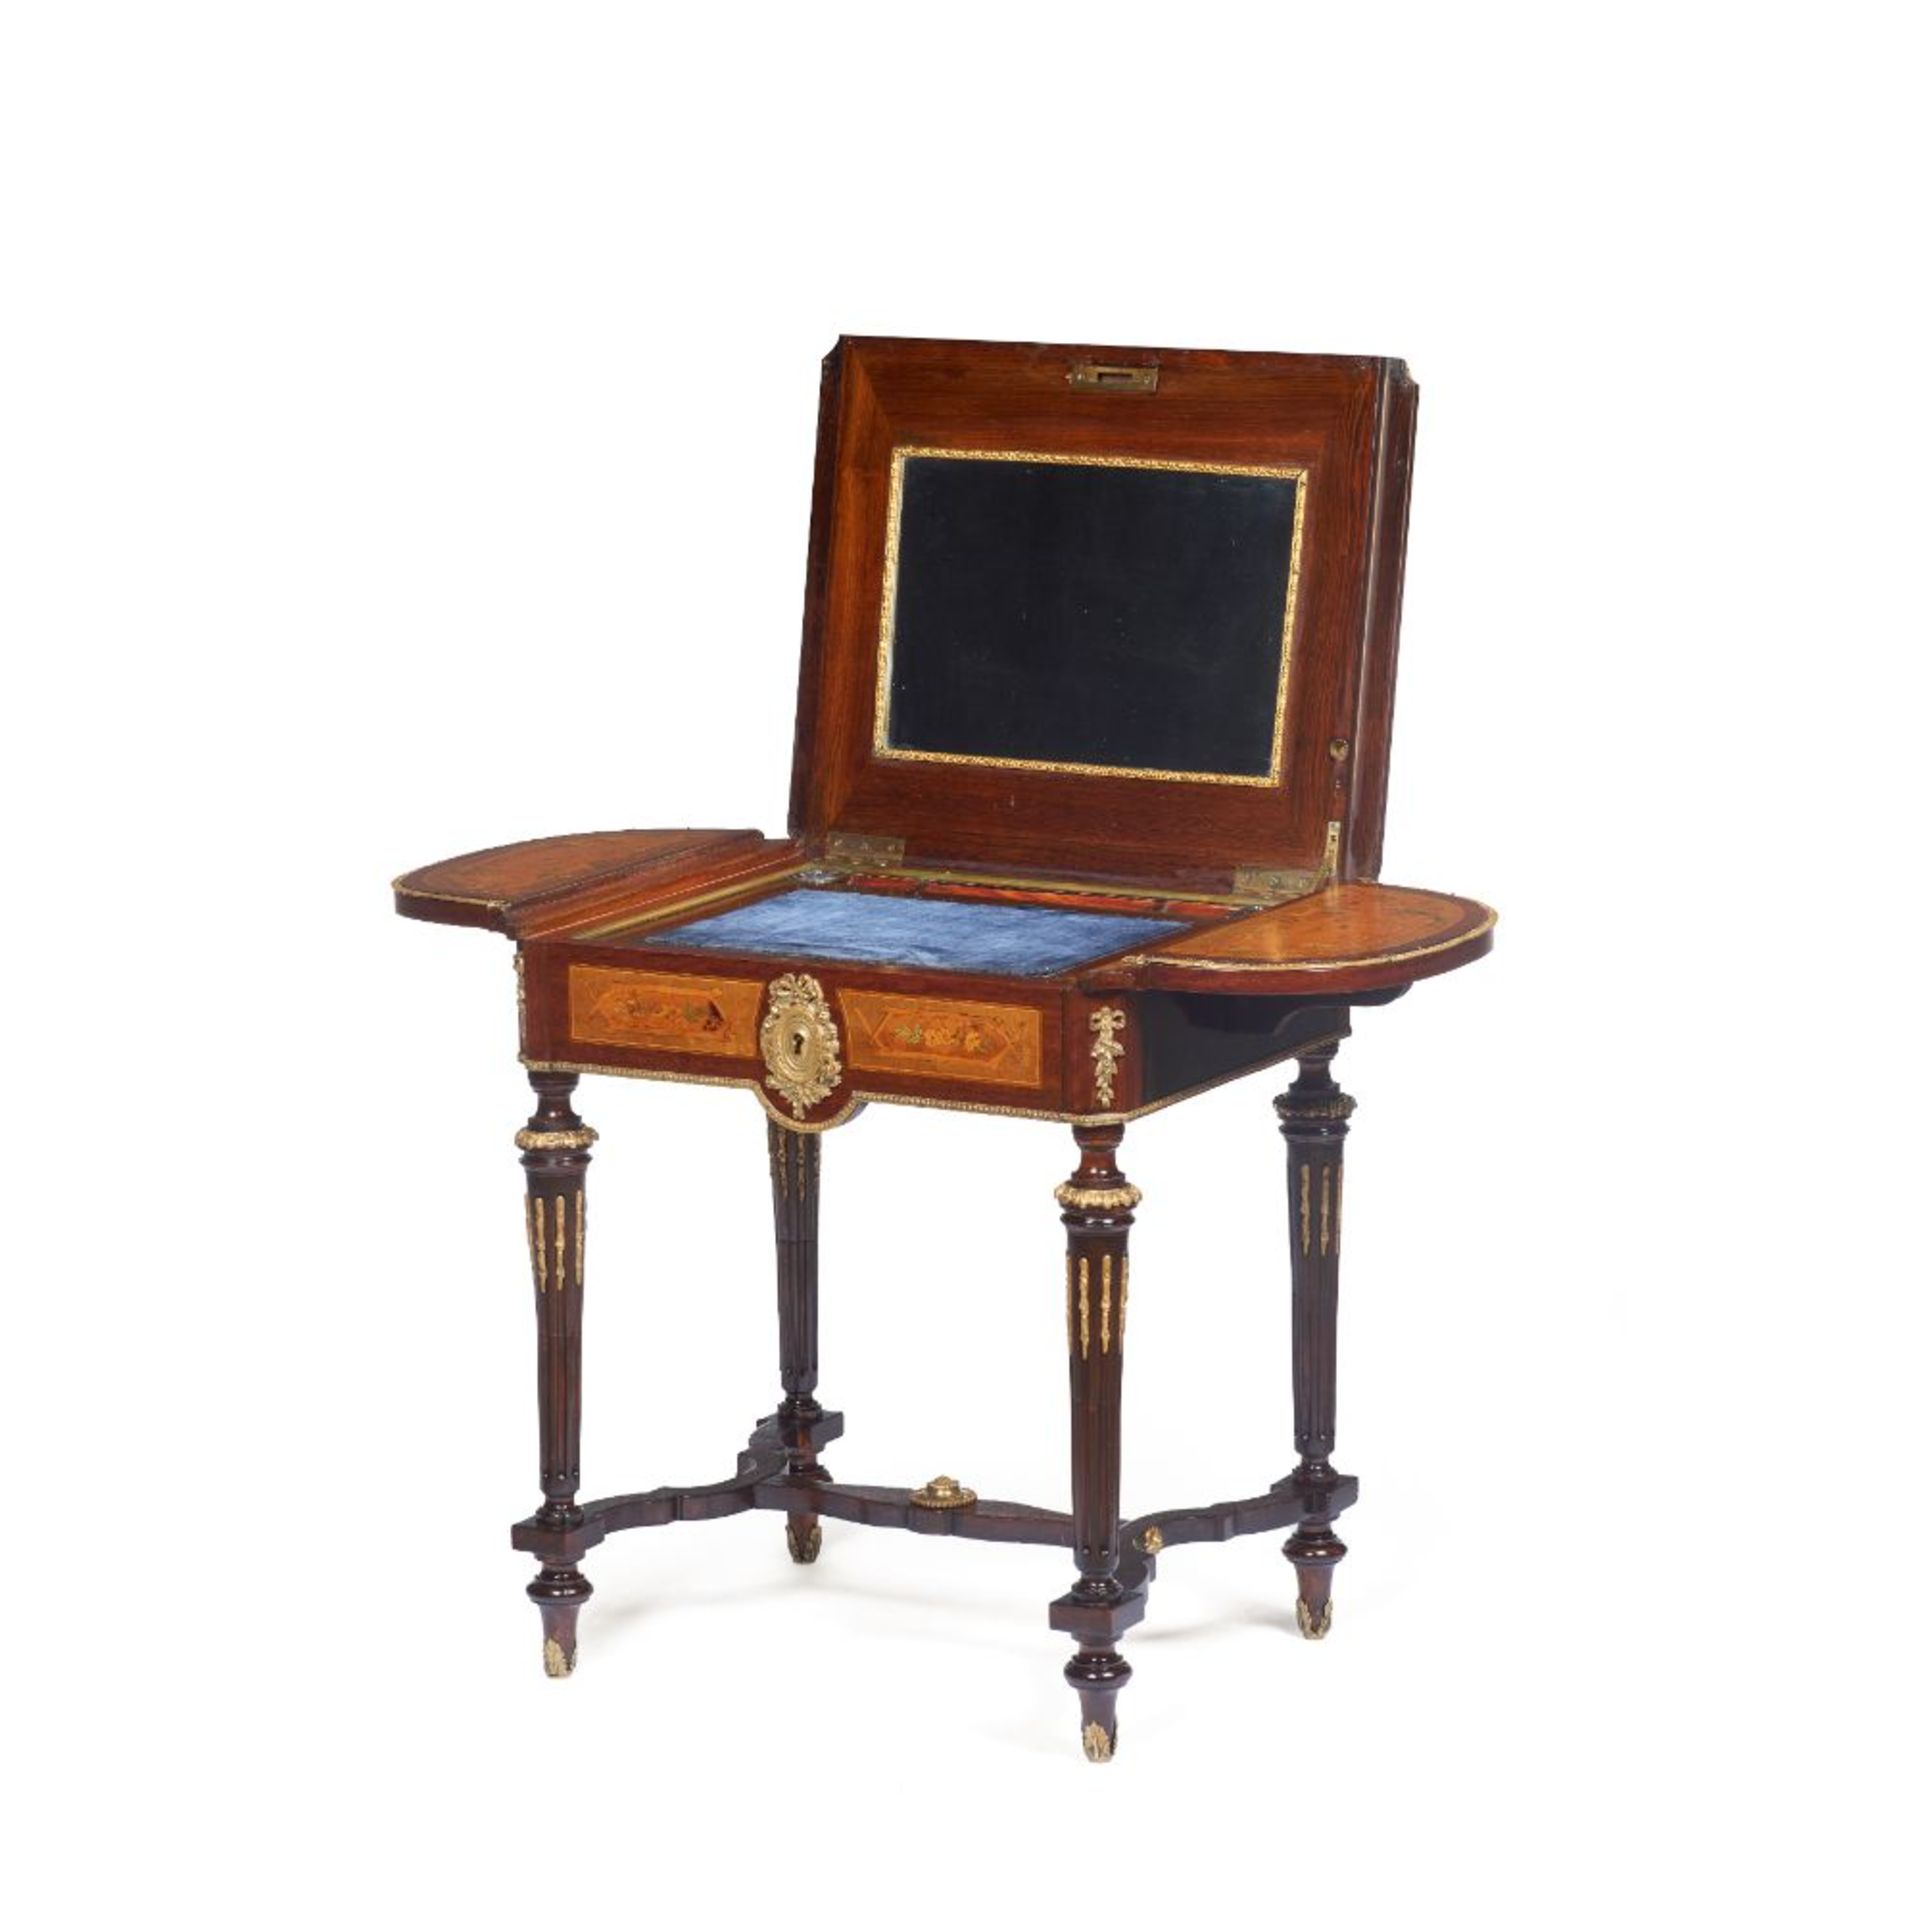 A drop leaf child's desk table, Rosewood and other woods, Rosewood, boxwood and other natural and - Image 3 of 3